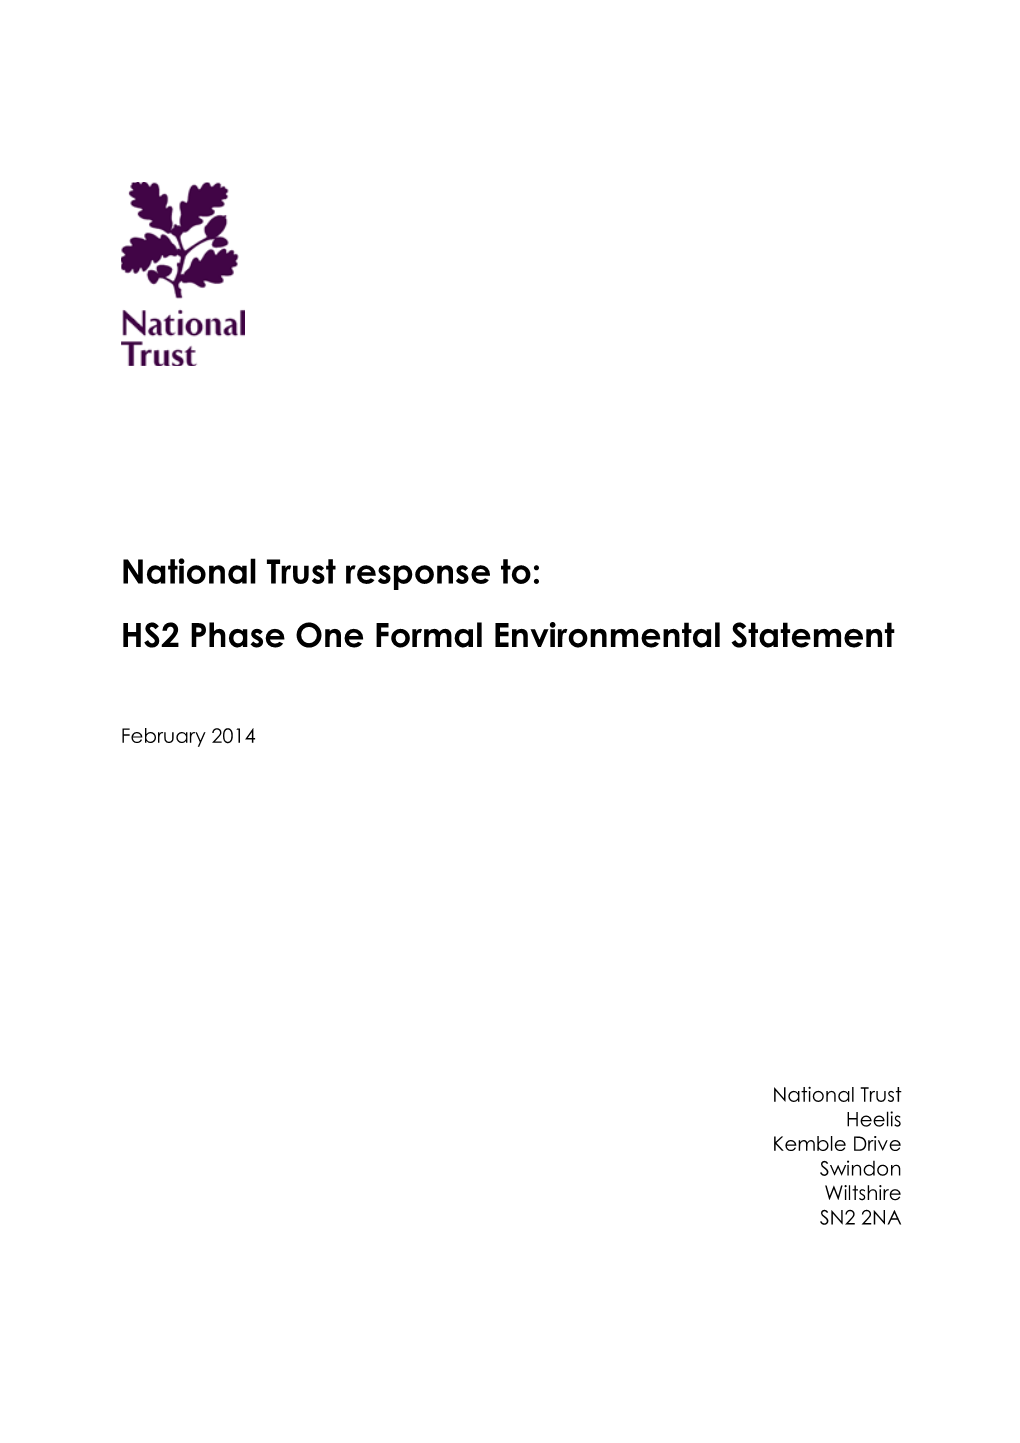 FINAL National Trust Response to HS2 Phase 1 Environmental Statement